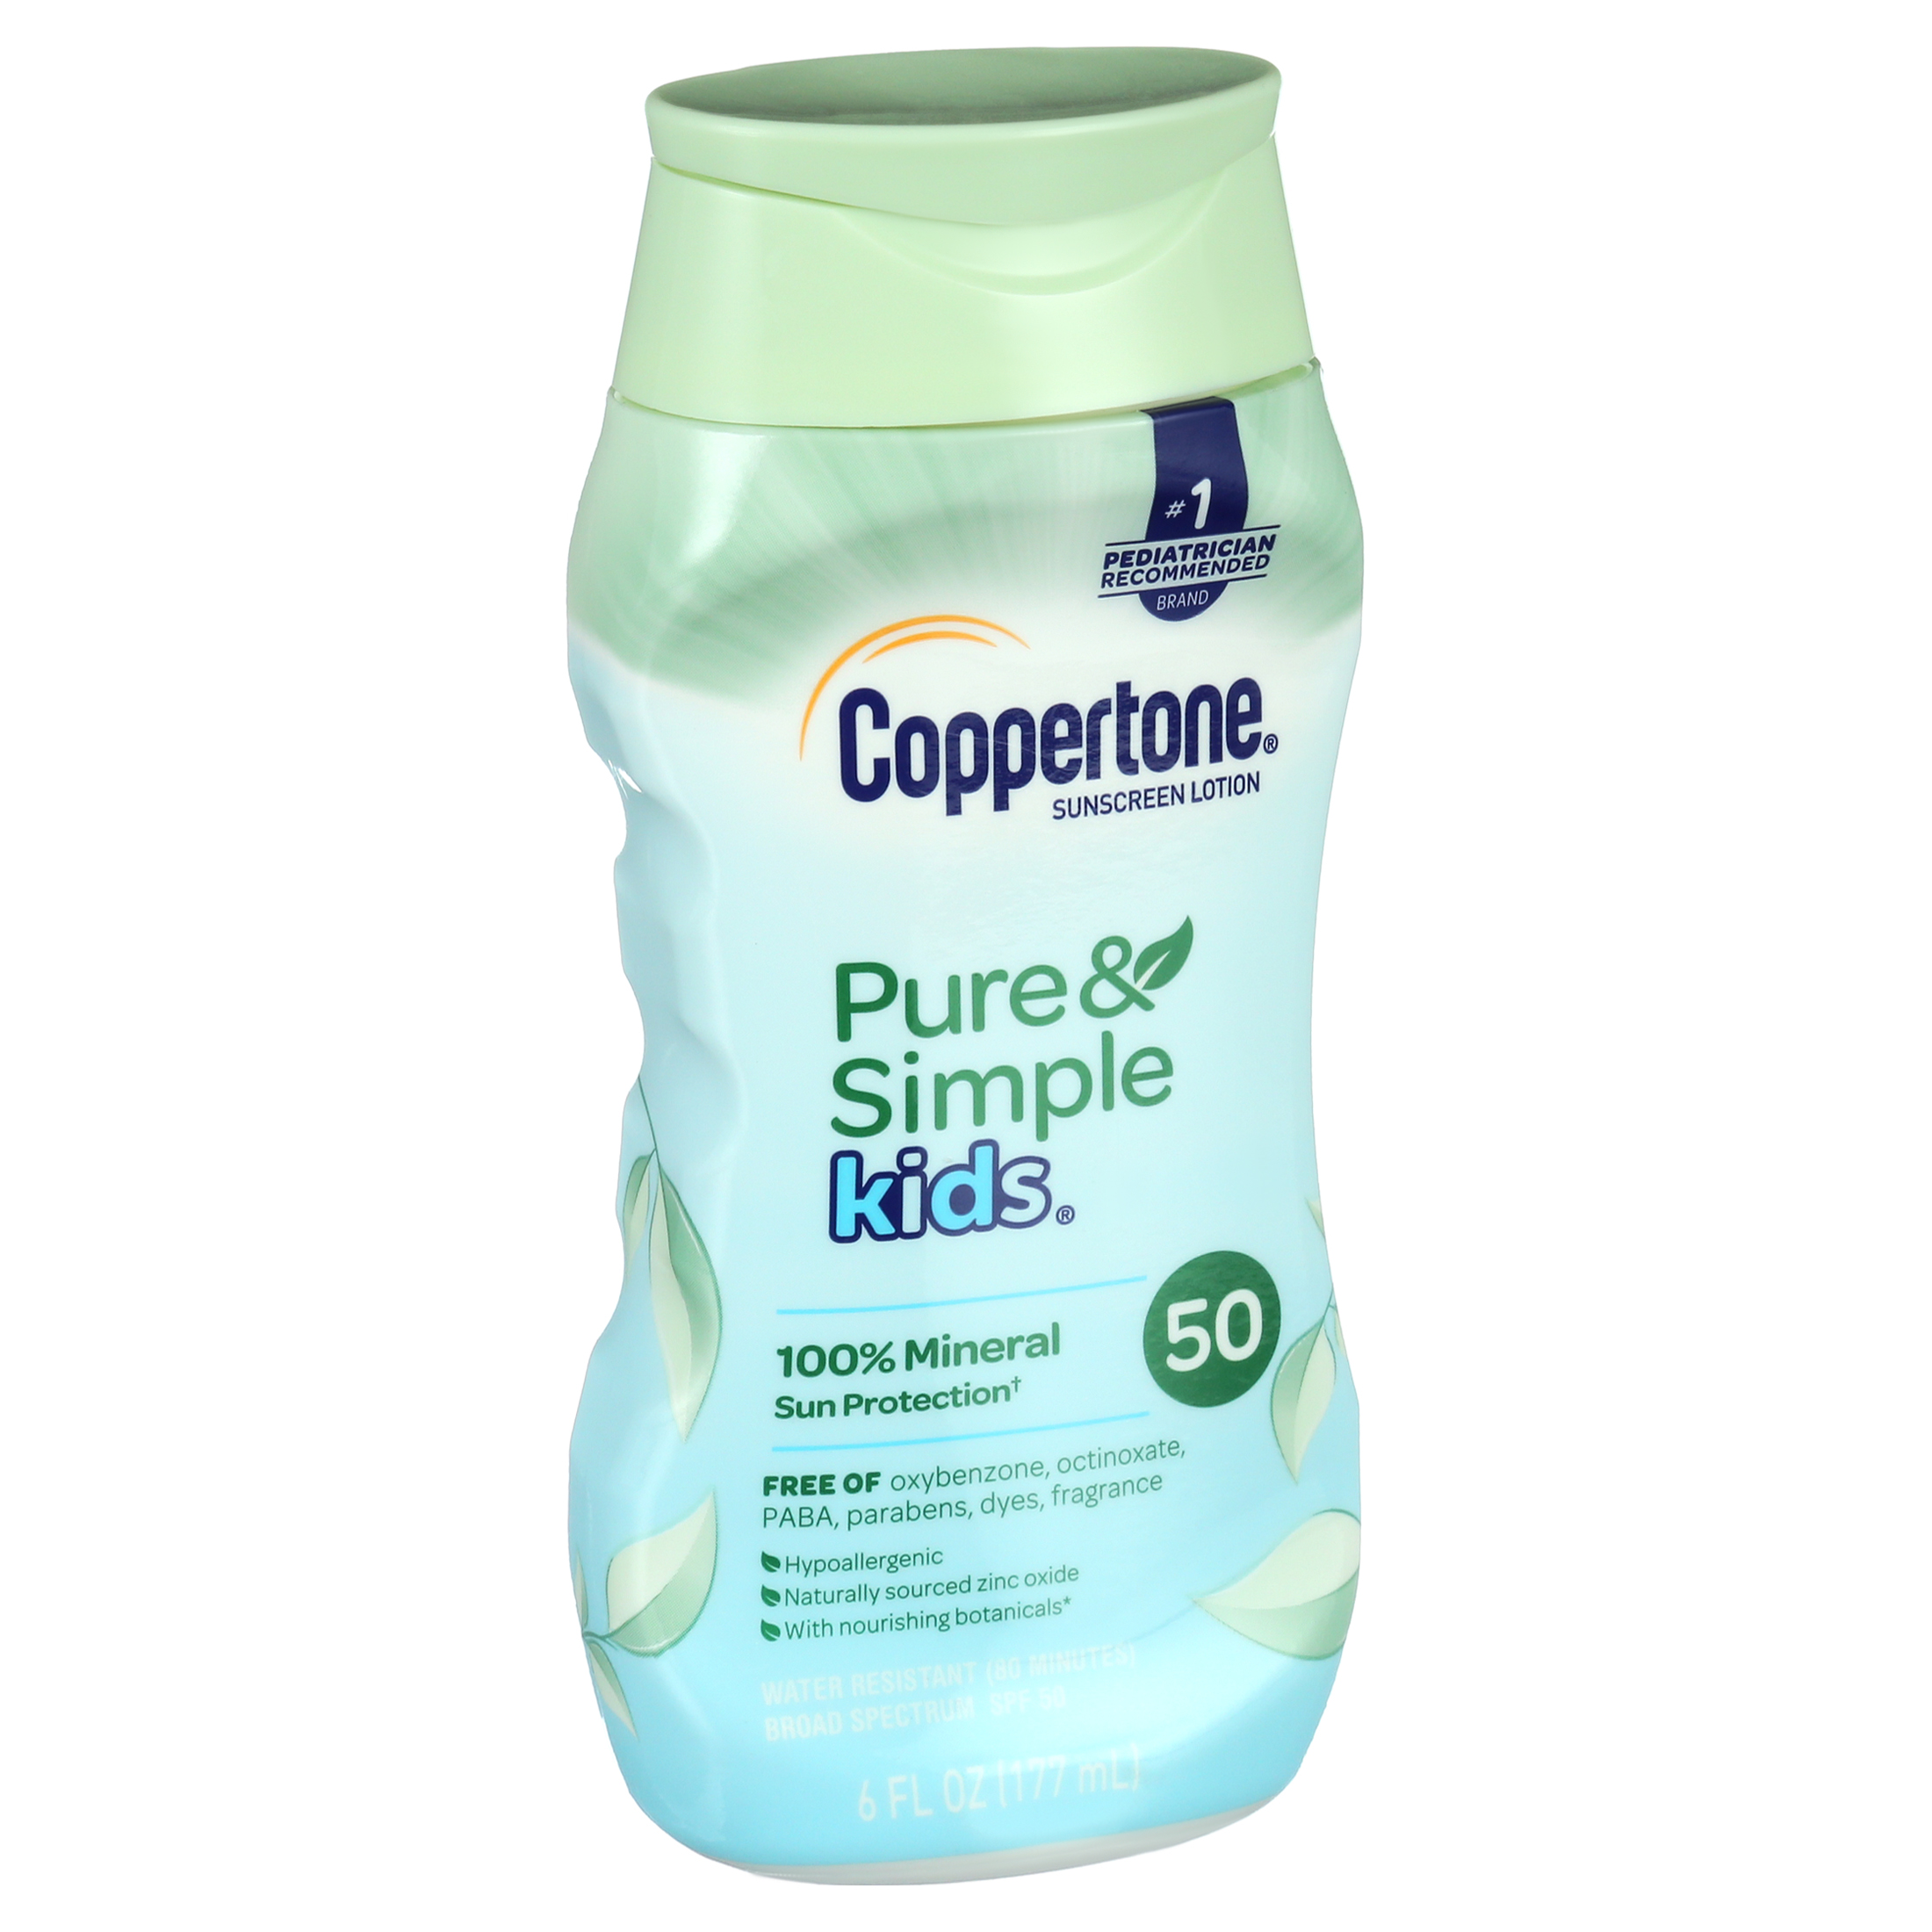 Coppertone Pure and Simple Kids Sunscreen Lotion, SPF 50, 6 Fl Oz - image 5 of 5